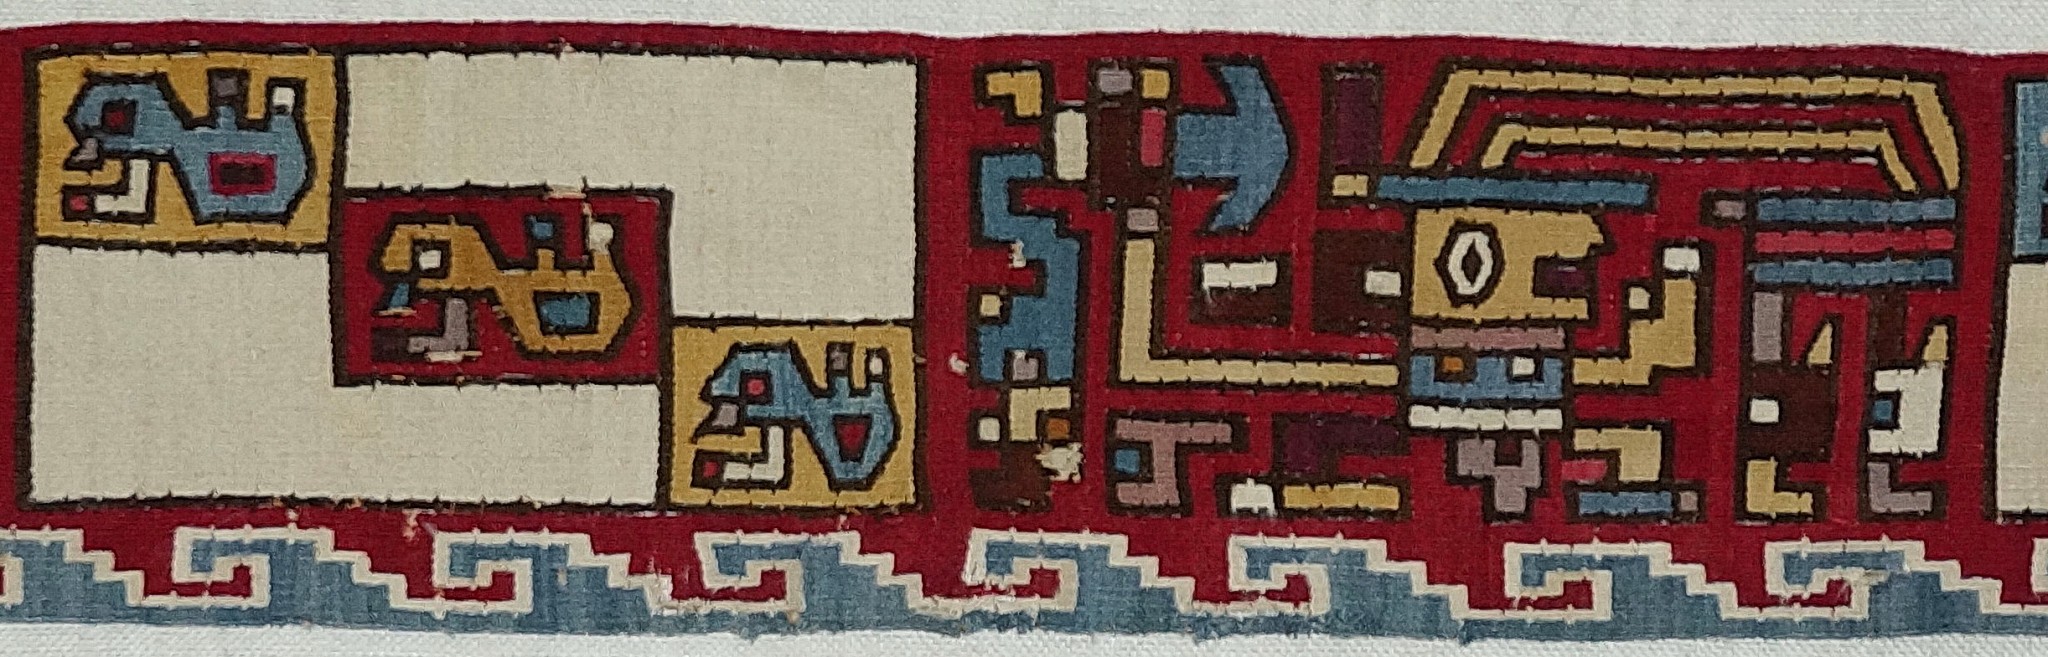 Peru, Huarmay Tapestry Border to a Poncho with Three Warriors
This classic Huarmay style tapestry is crafted in the classic Huarmay colors of ivory, blue, and red with black outlines.  Each warrior wears different colors, and each holds a tumi in his left hand and wears an elaborate headdress with two long, forward-tilting plumes.  Separating the warriors are blocks of ivory with three abstract birds on a diagonal.  Along the bottom edge is a repeating classic step volute line in blue with a white outline.  The Huarmay culture thrived during the Late Moche Period on the most Southern of the fourteen Moche valleys, and were influenced by the Wari.  Mounted, in a Plexiglas box.  Minor losses to the ivory central panel. Formerly in a New York private collection prior to 1979.
Media: Textile
Dimensions: Width: 48" x Height: 6 1/2"
$8,500
n9040